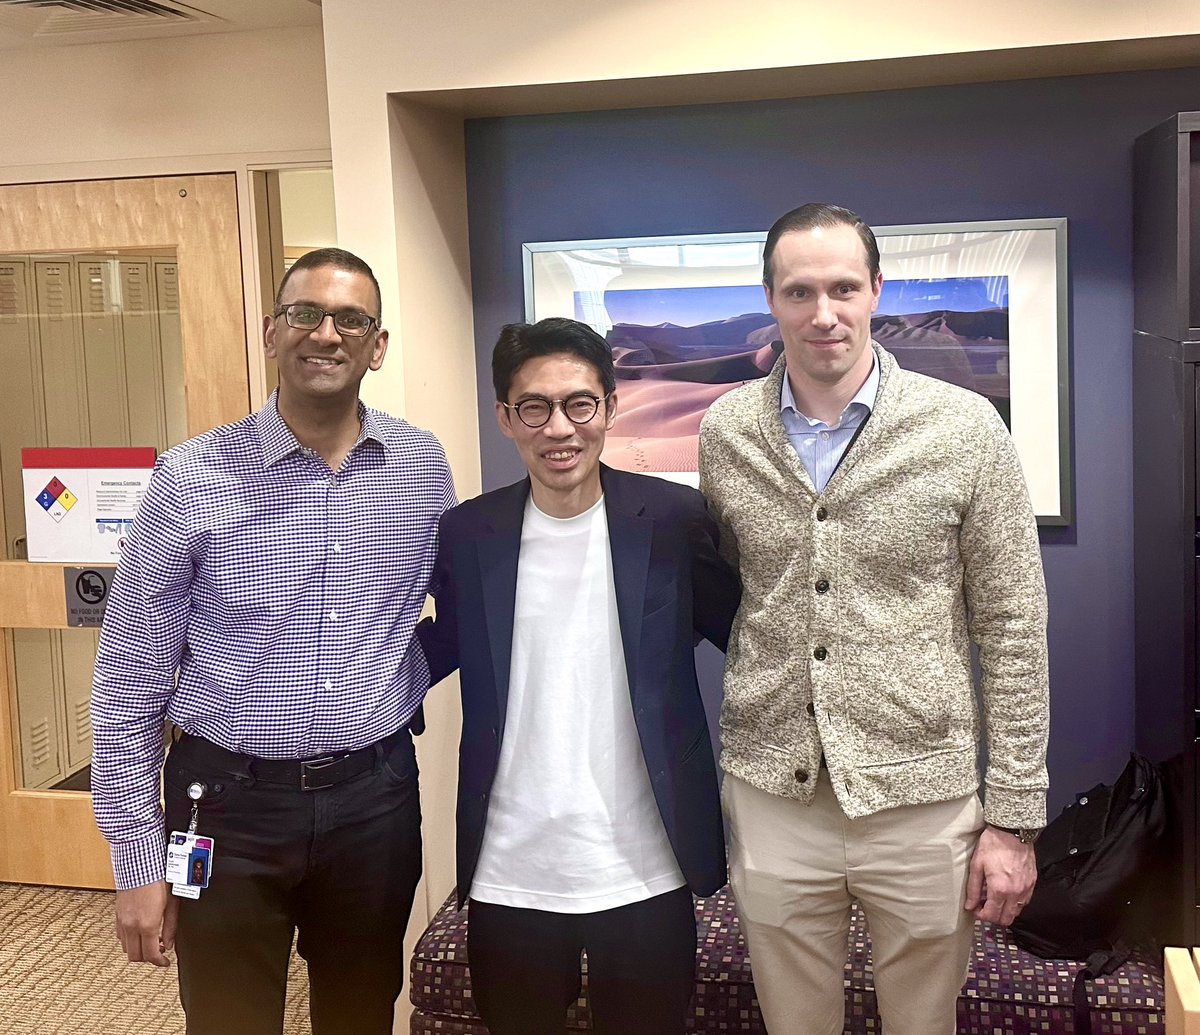 Great chat with Grant (@bloodandtime1) and Vijay (@bloodgenes) at @BostonChildrens! Thanks for discussing mitochondrial regulation in adult and developmental hematopoiesis and experimental hematology @ELShematology. Excited for collaborations! See you at @ISEHSociety in Chicago!